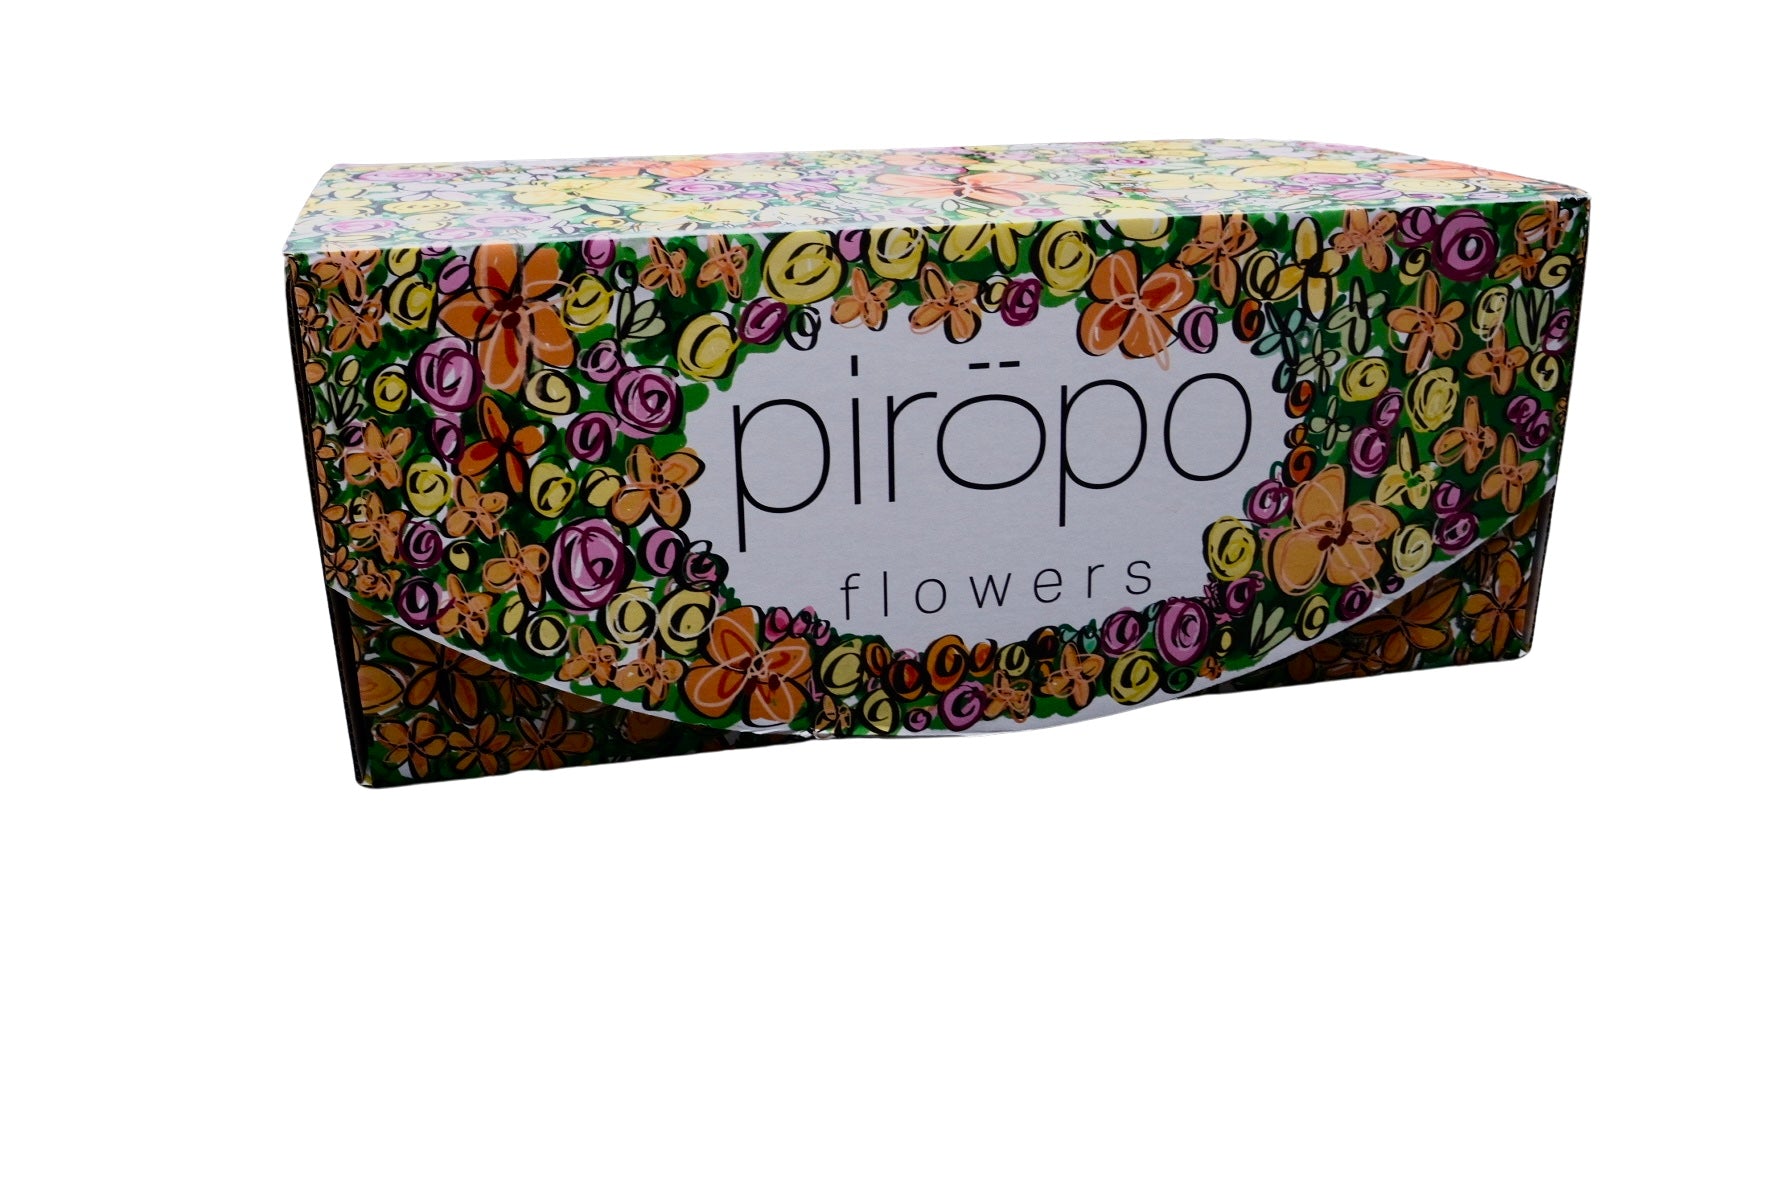 Seasonal flower bouquet with special gift box piropo flowers